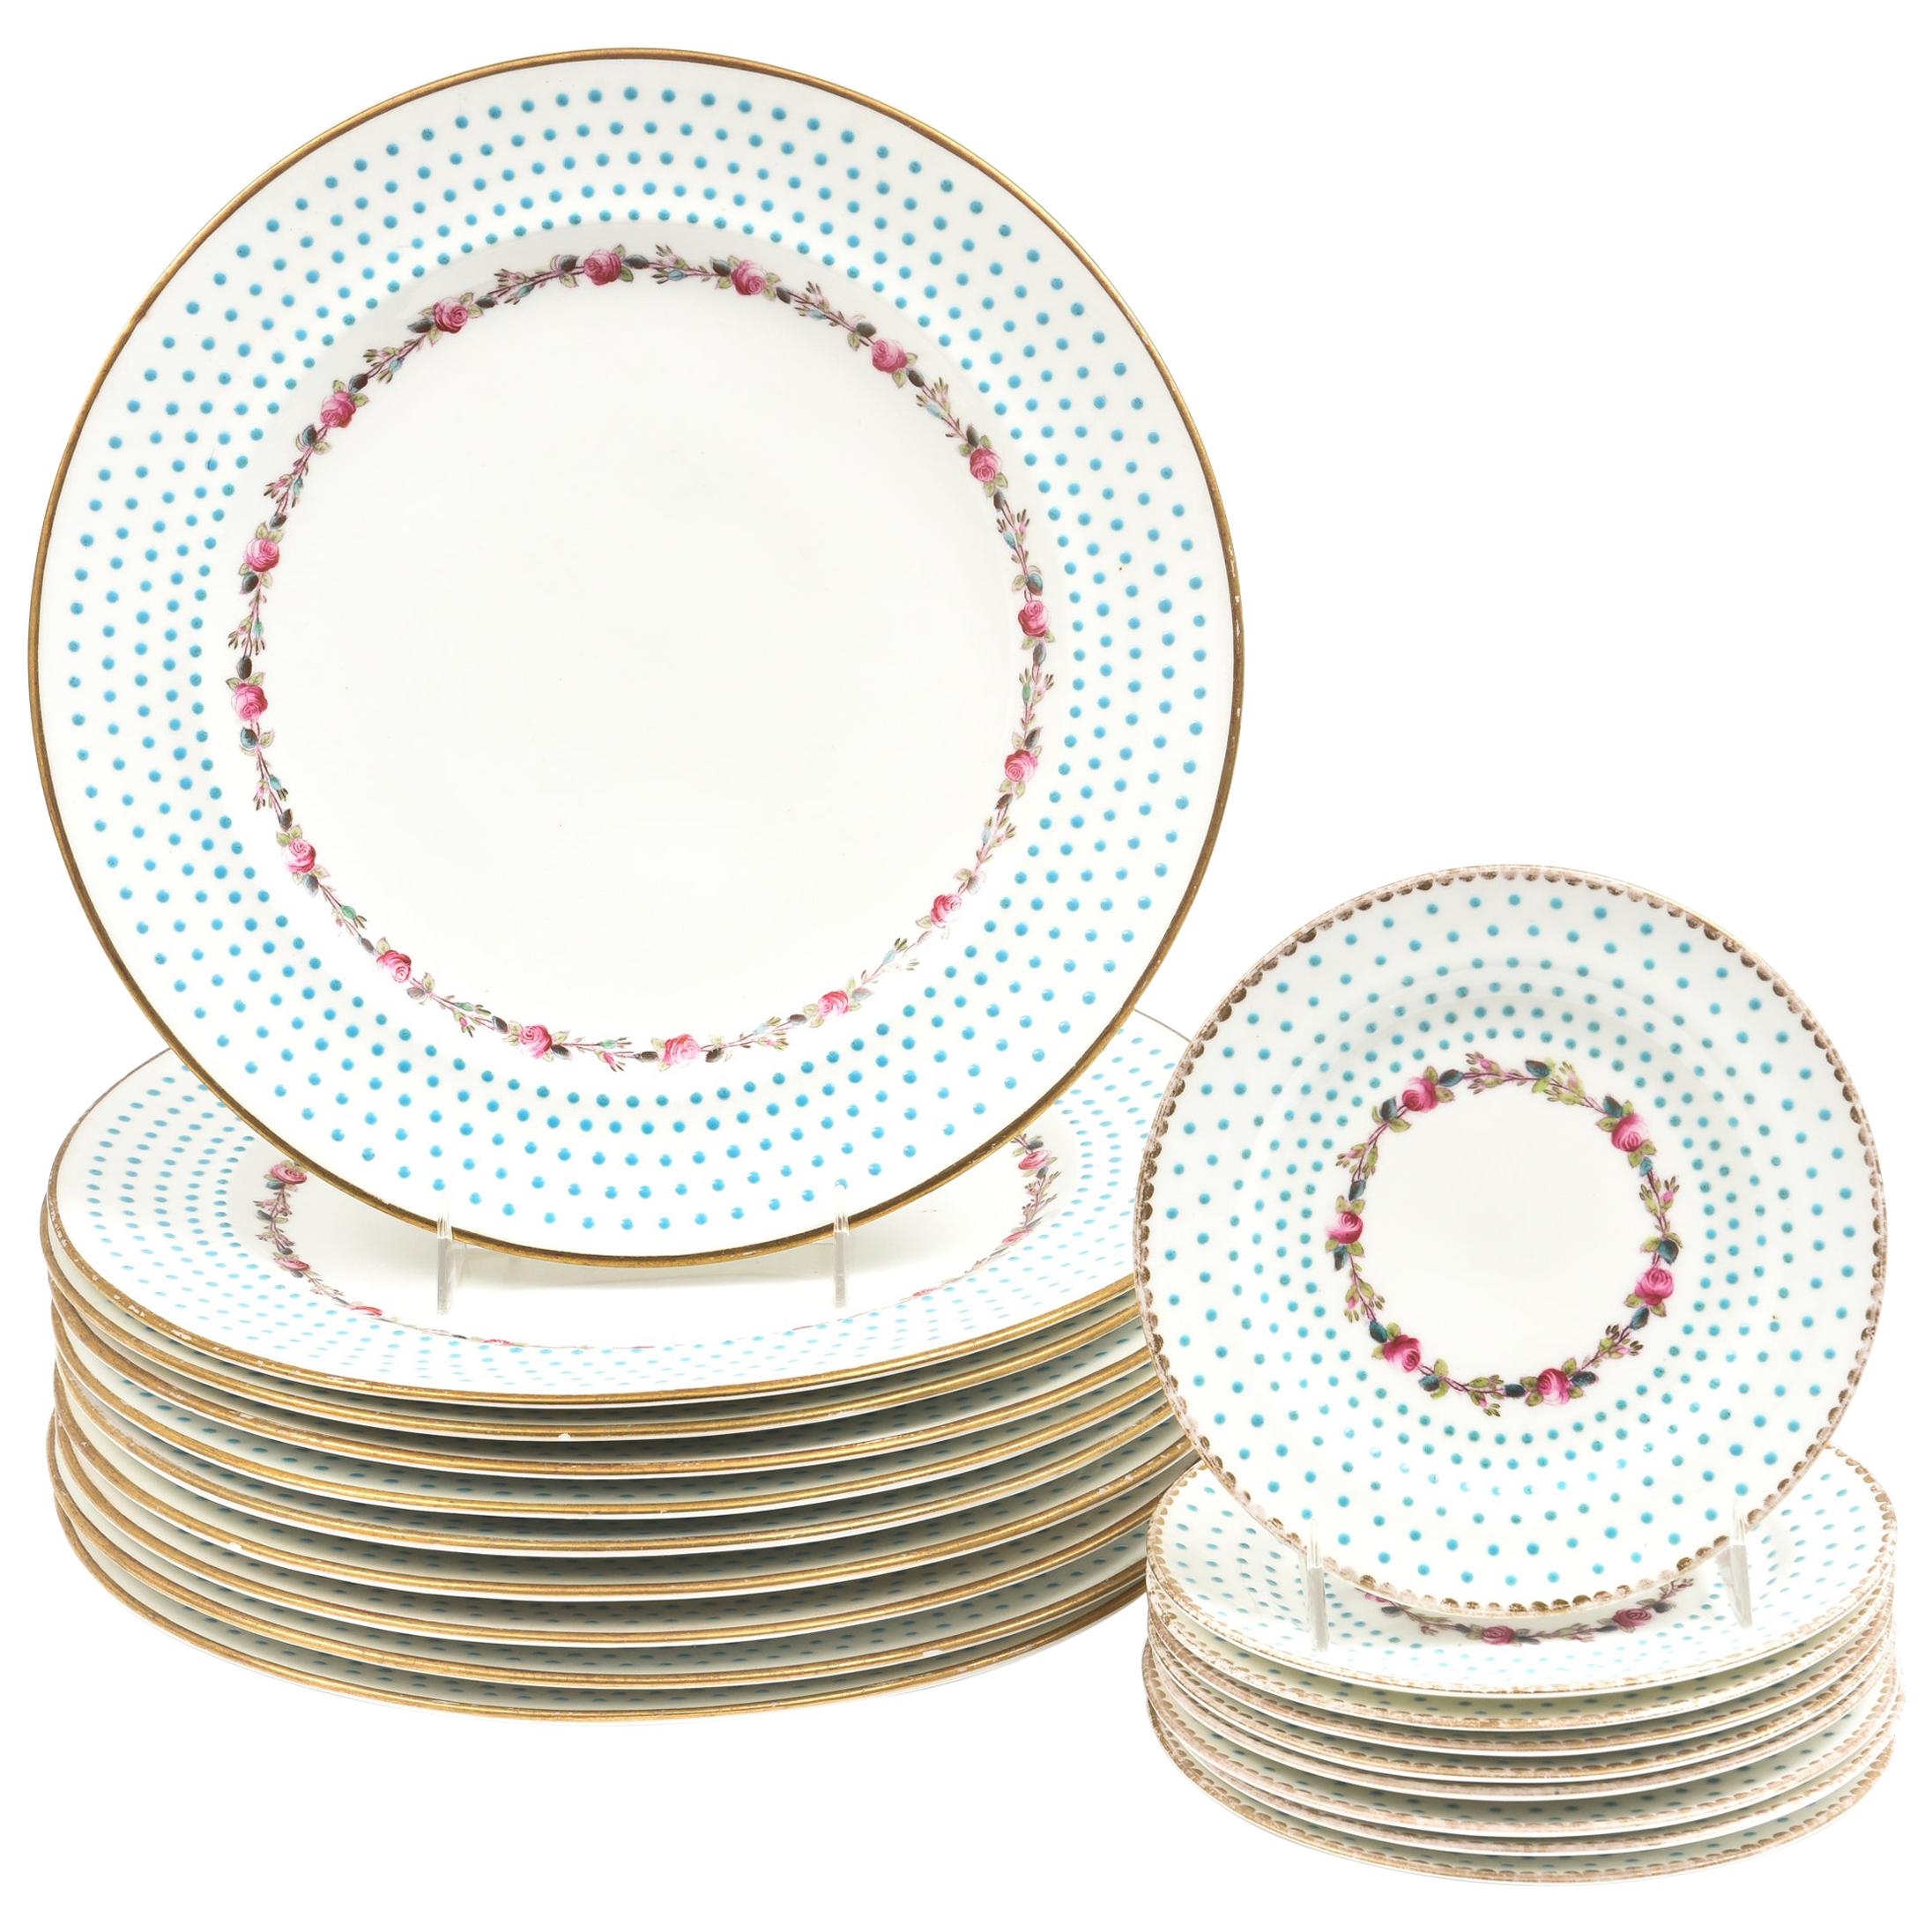 Antique Turquoise & Pink Rose Partial Dinner Set Dinner Plates & Bread Plates